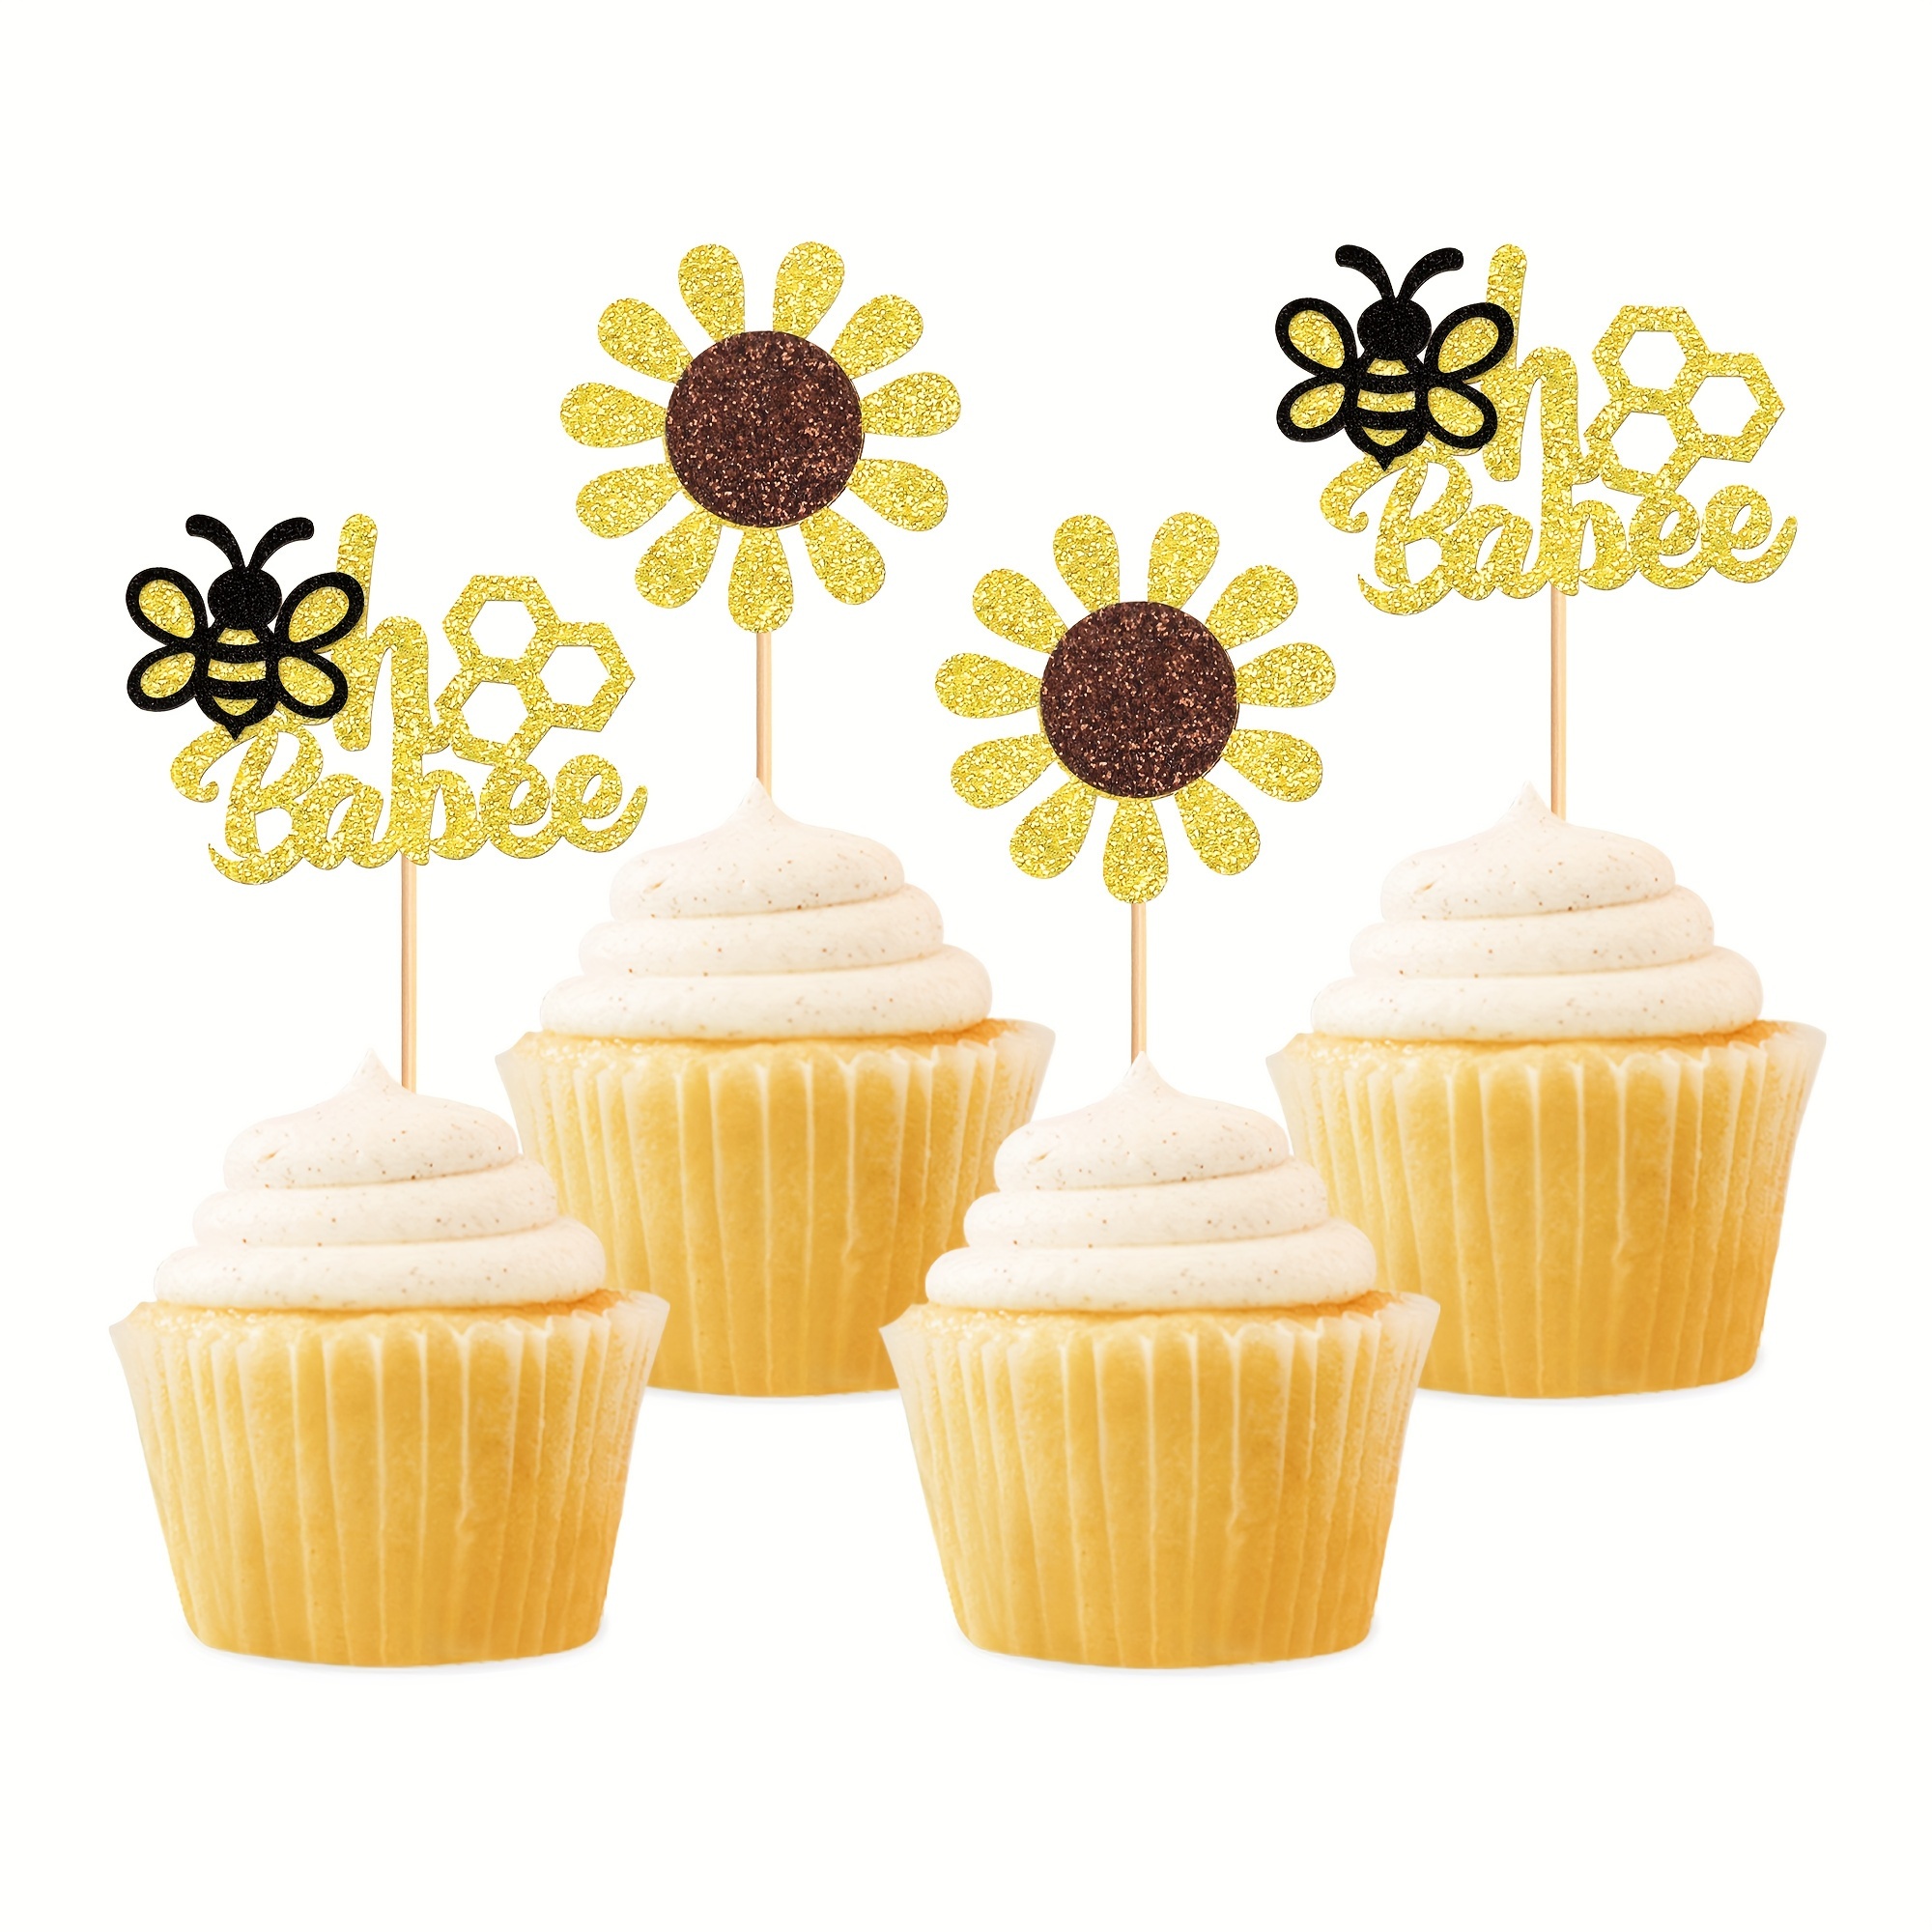 50 Pack Bee Cupcake Toppers Glitter Bumble Bee Cupcake Toppers for Bumble Bee Gender Reveal Baby Shower Birthday Party Decor